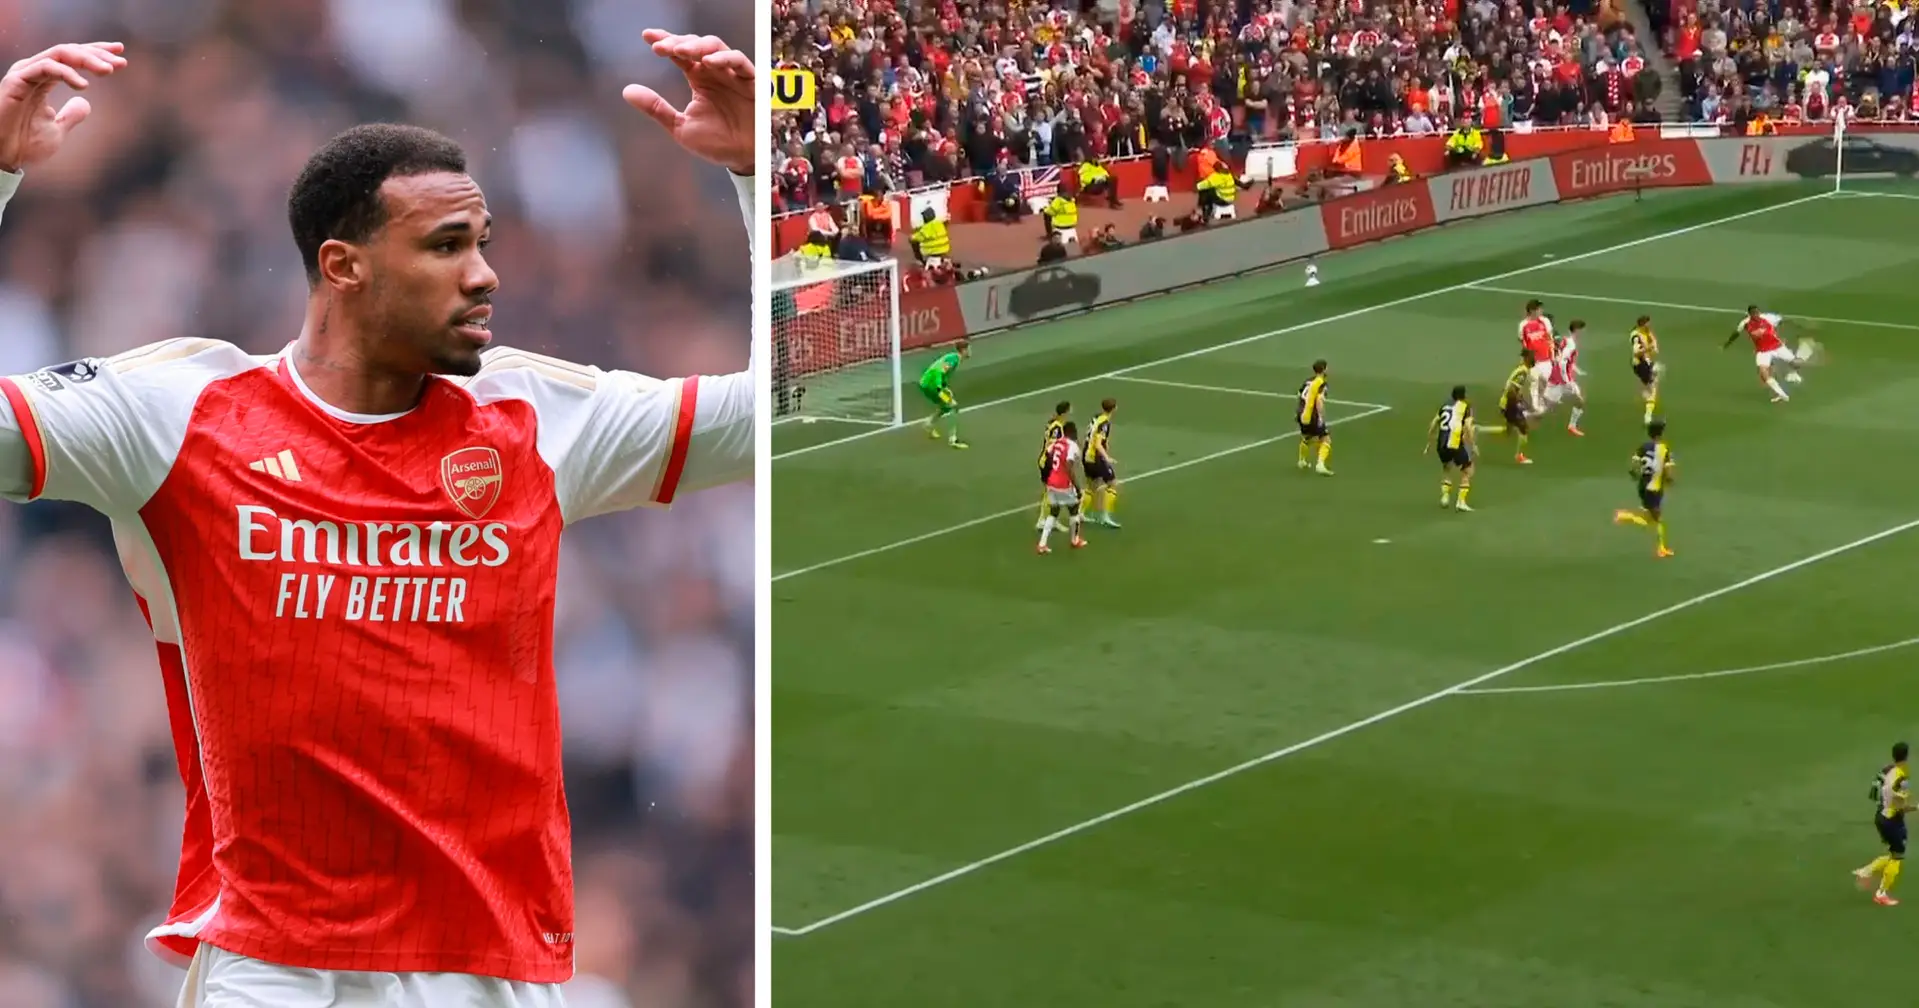 'They should change the rules': fans react to Gabriel's fantastic goal that was disallowed